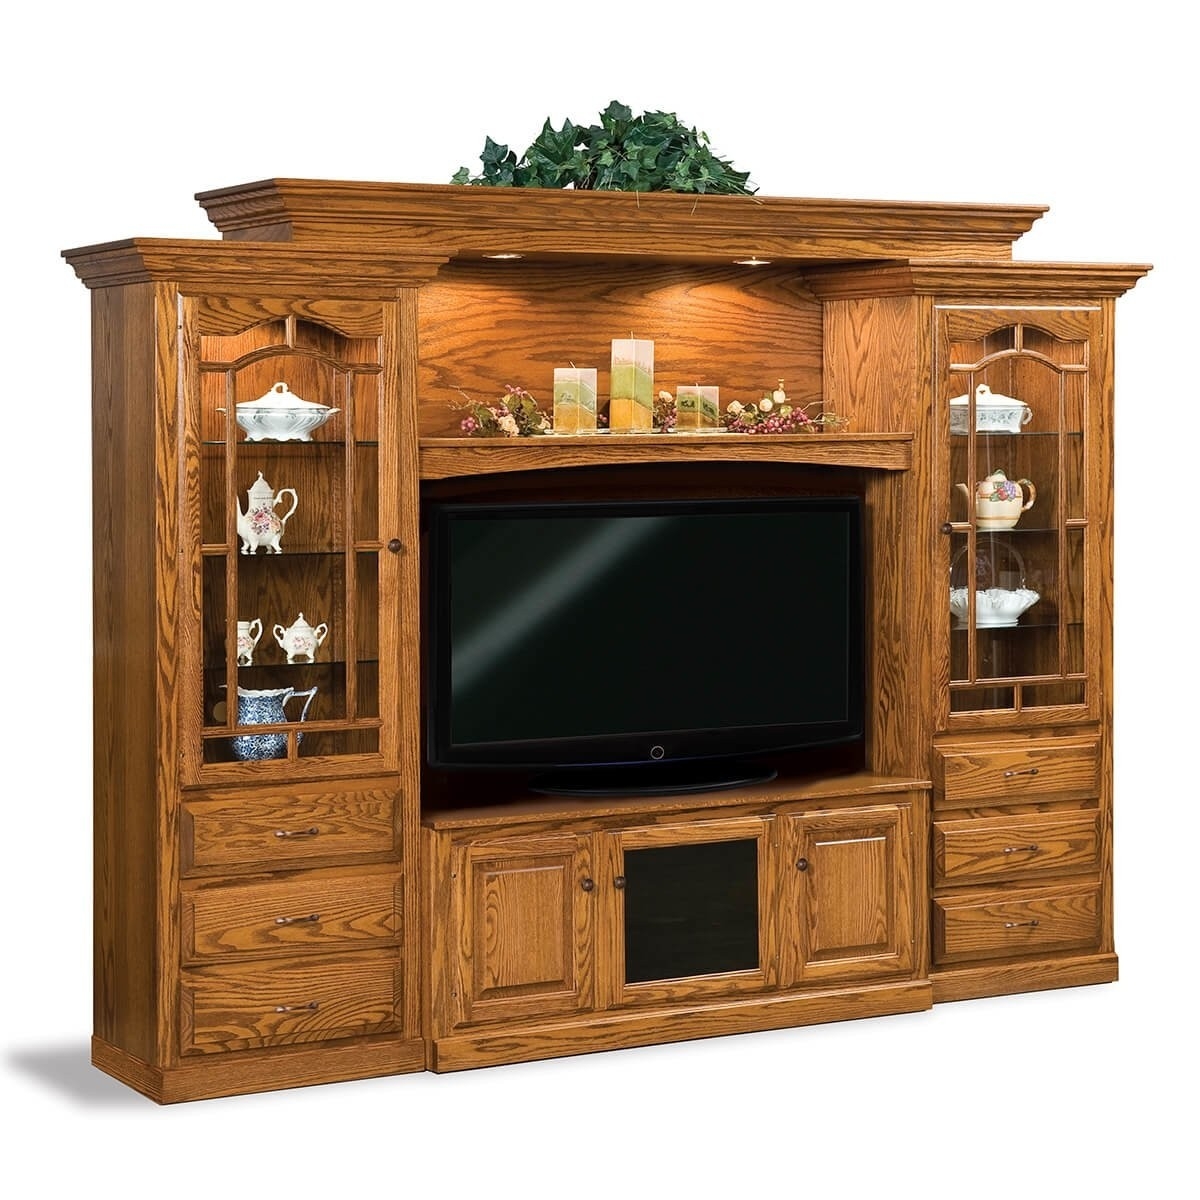 Featured image of post Wall Tv Stand Wood Design : Modern tv stand assortment offers a lot of different options when it comes to aesthetics and practicality.